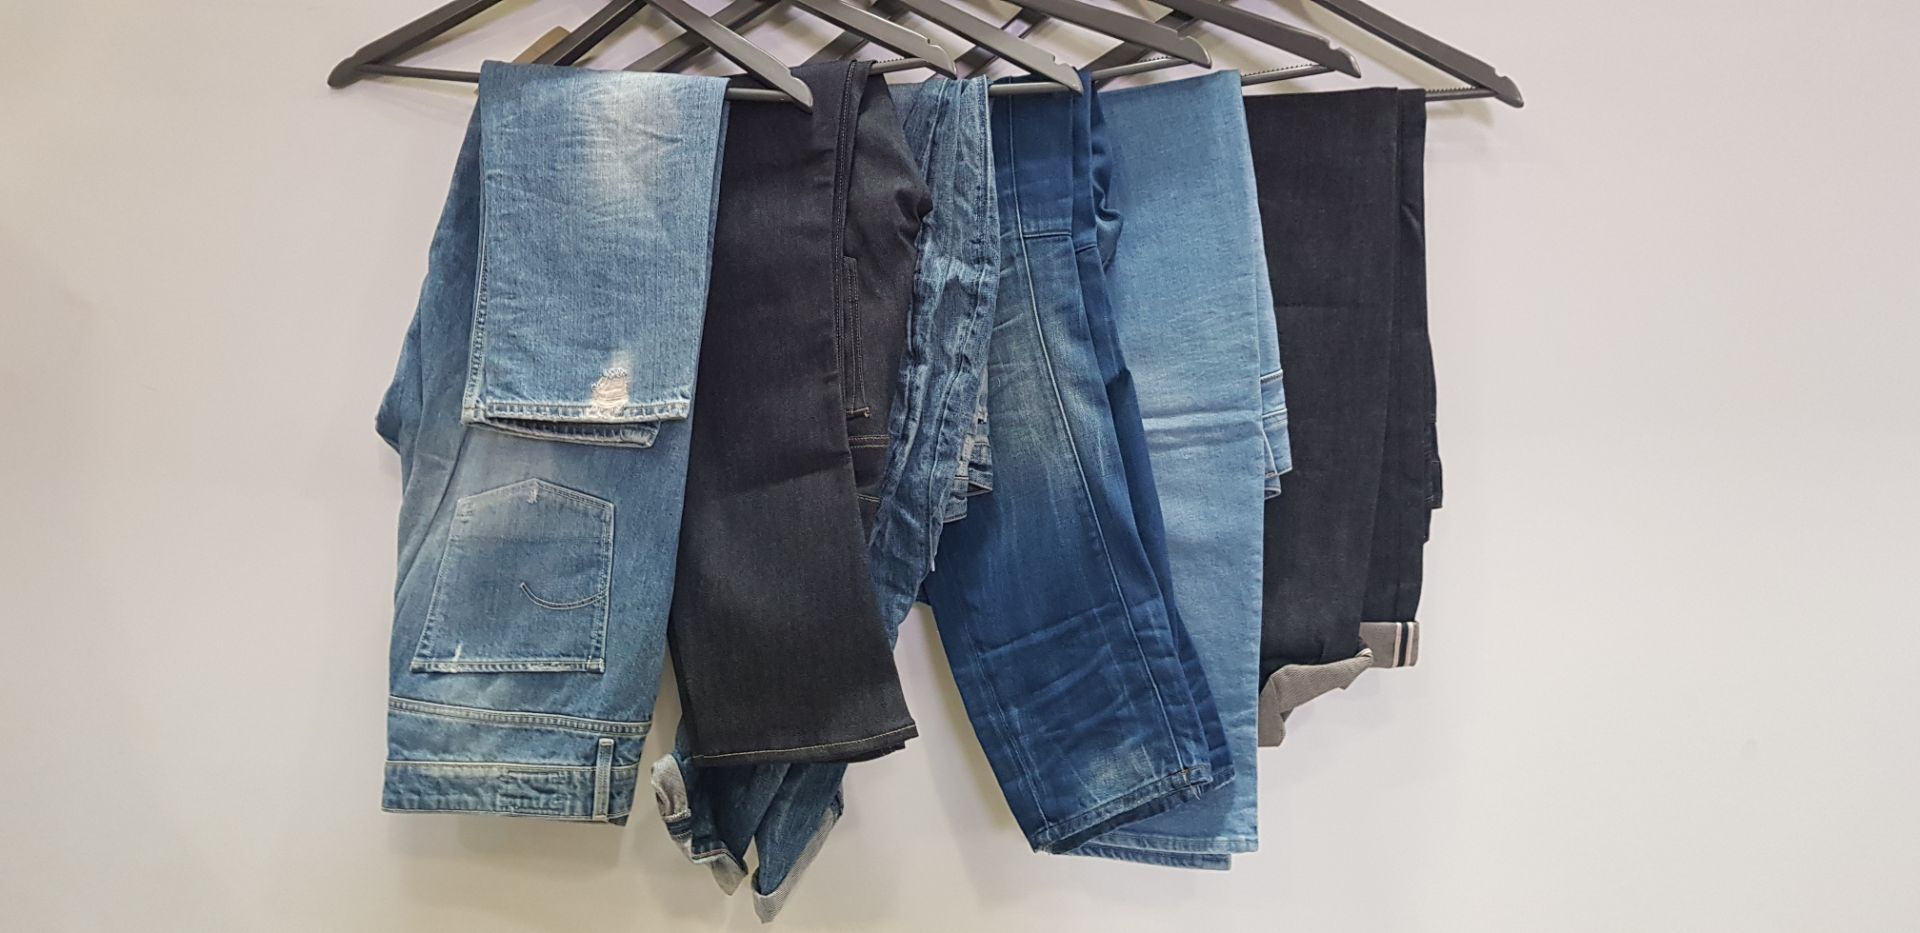 6 X BRAND NEW G-STAR RAW JEANS IN VARIOUS COLOURS (SIZE32)